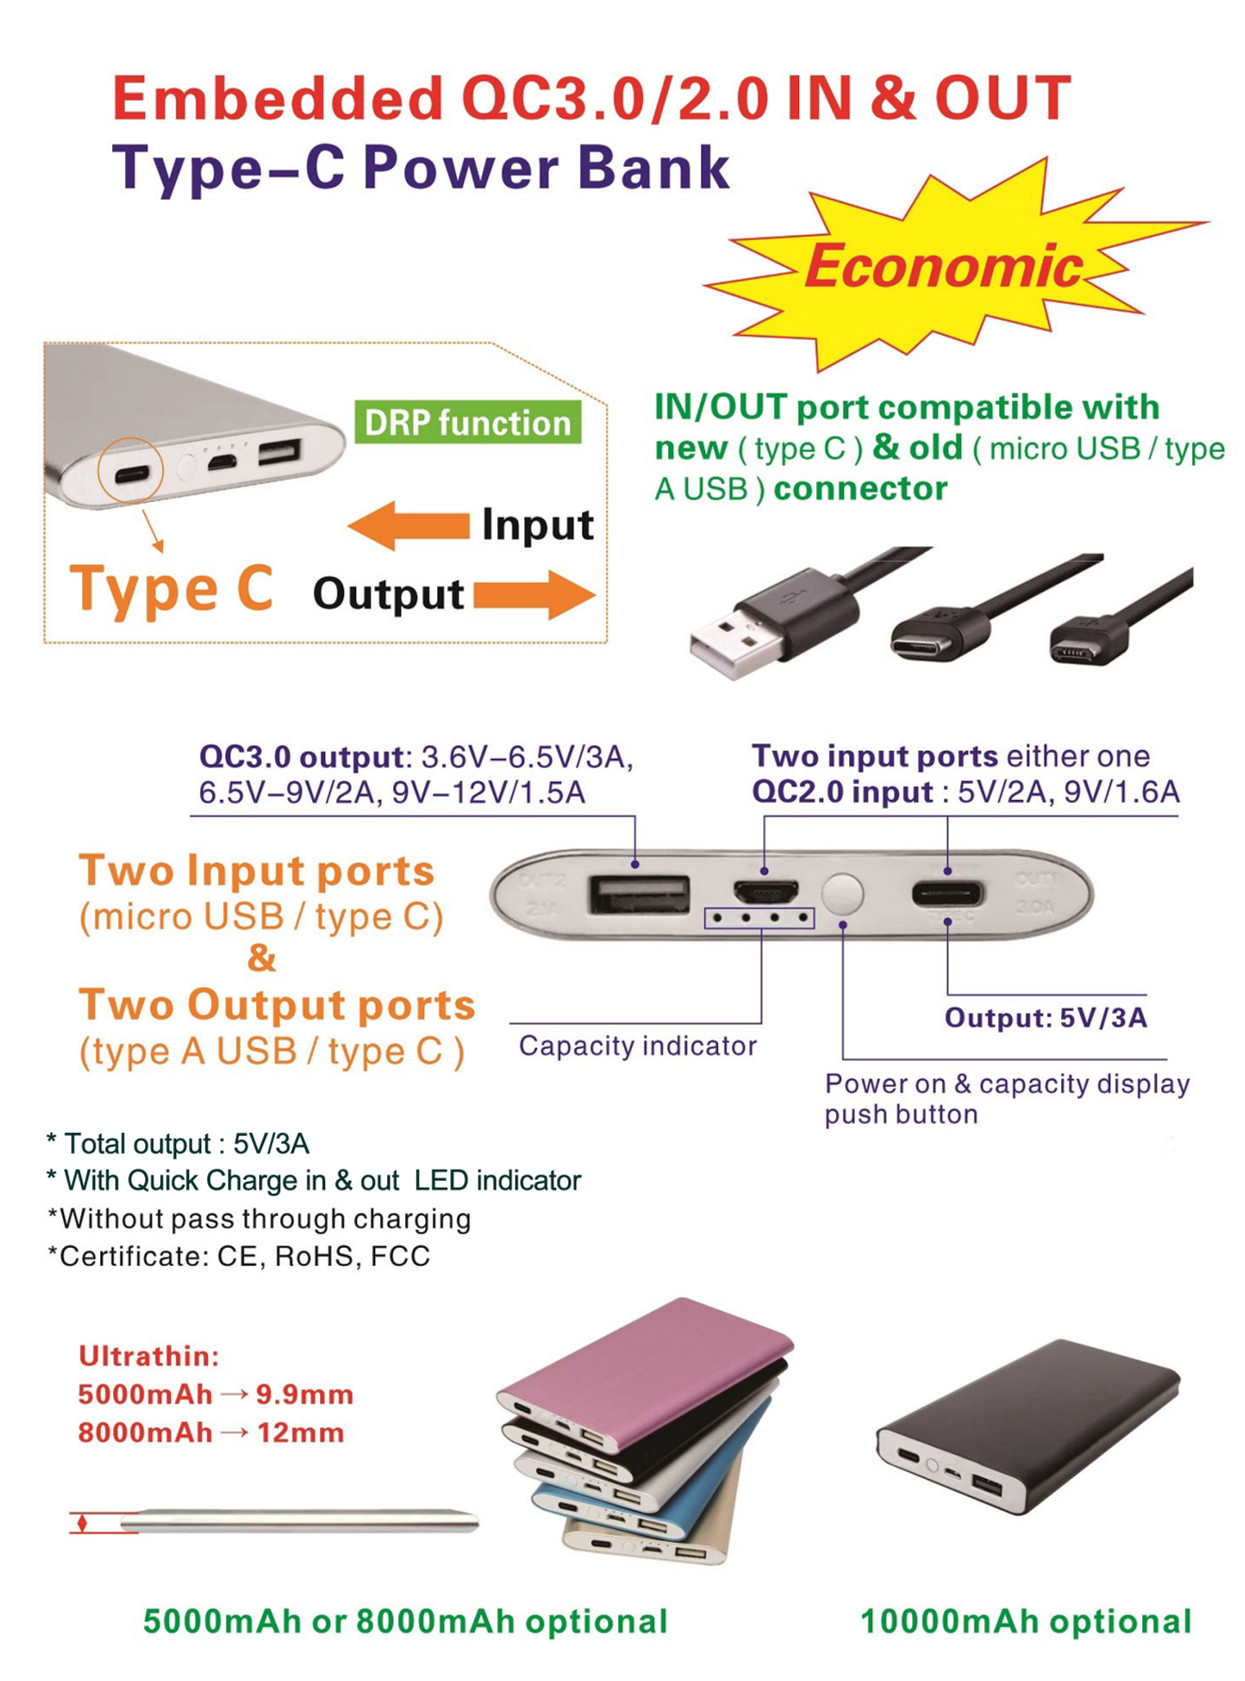 Embedded QC3.0/2.0 IN&OUT Type-C power bank